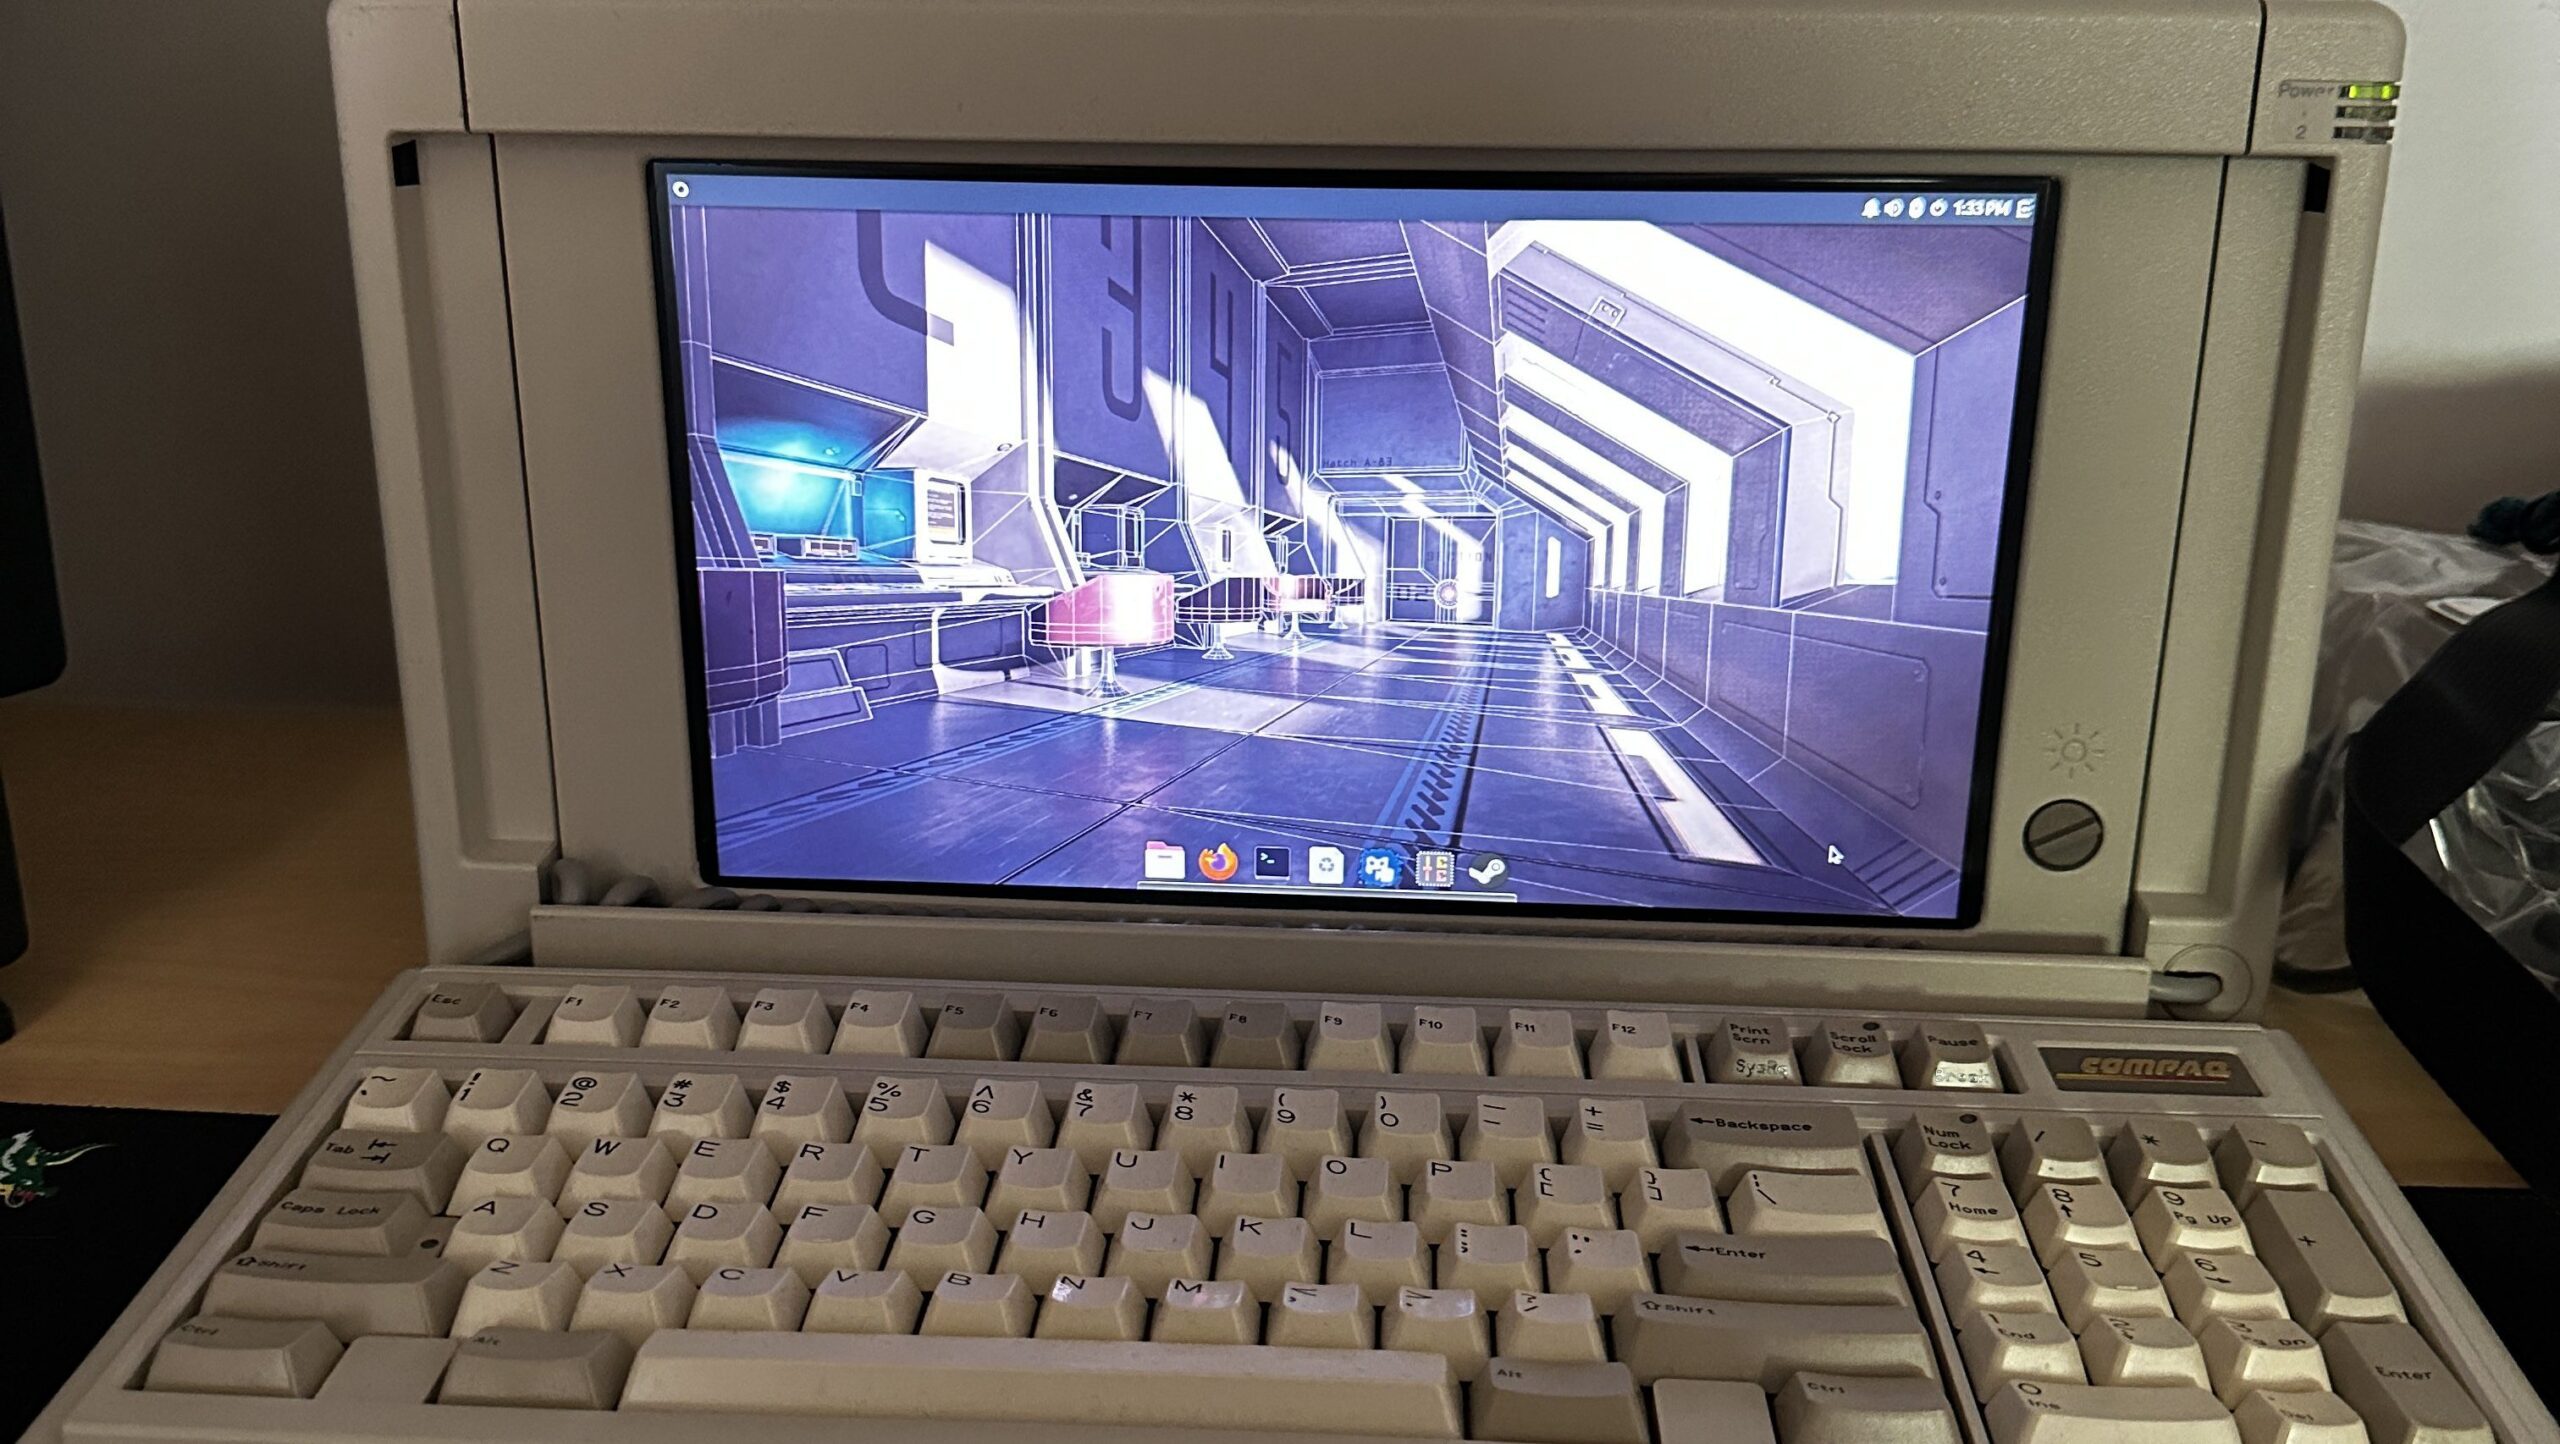 Compaq Portable III Is More Than Meets The Eye